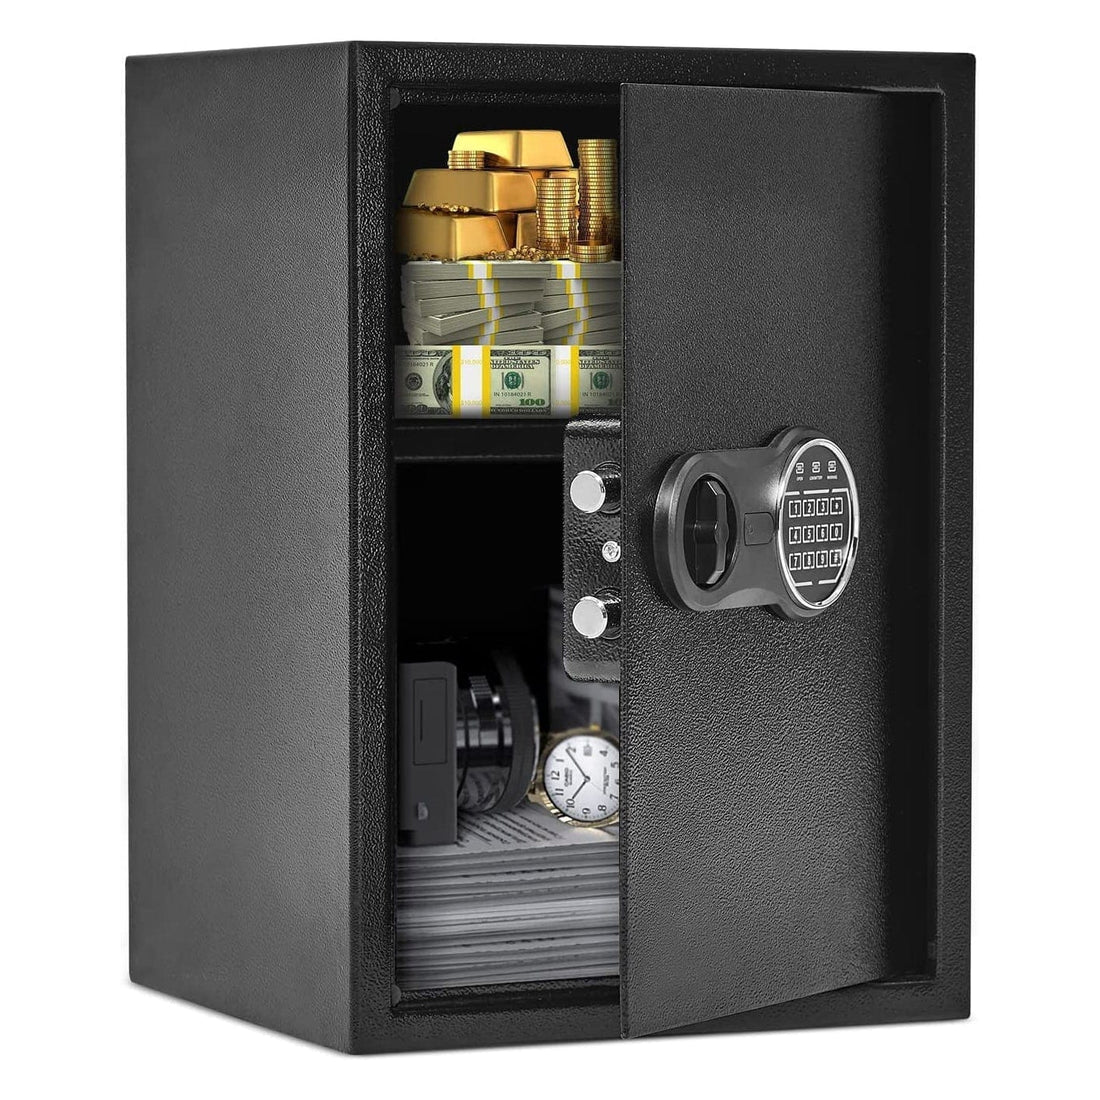 Security Safe With Digital Keypad Lock 19.6 x 13.7 x 12.2 Inches Steel Safe